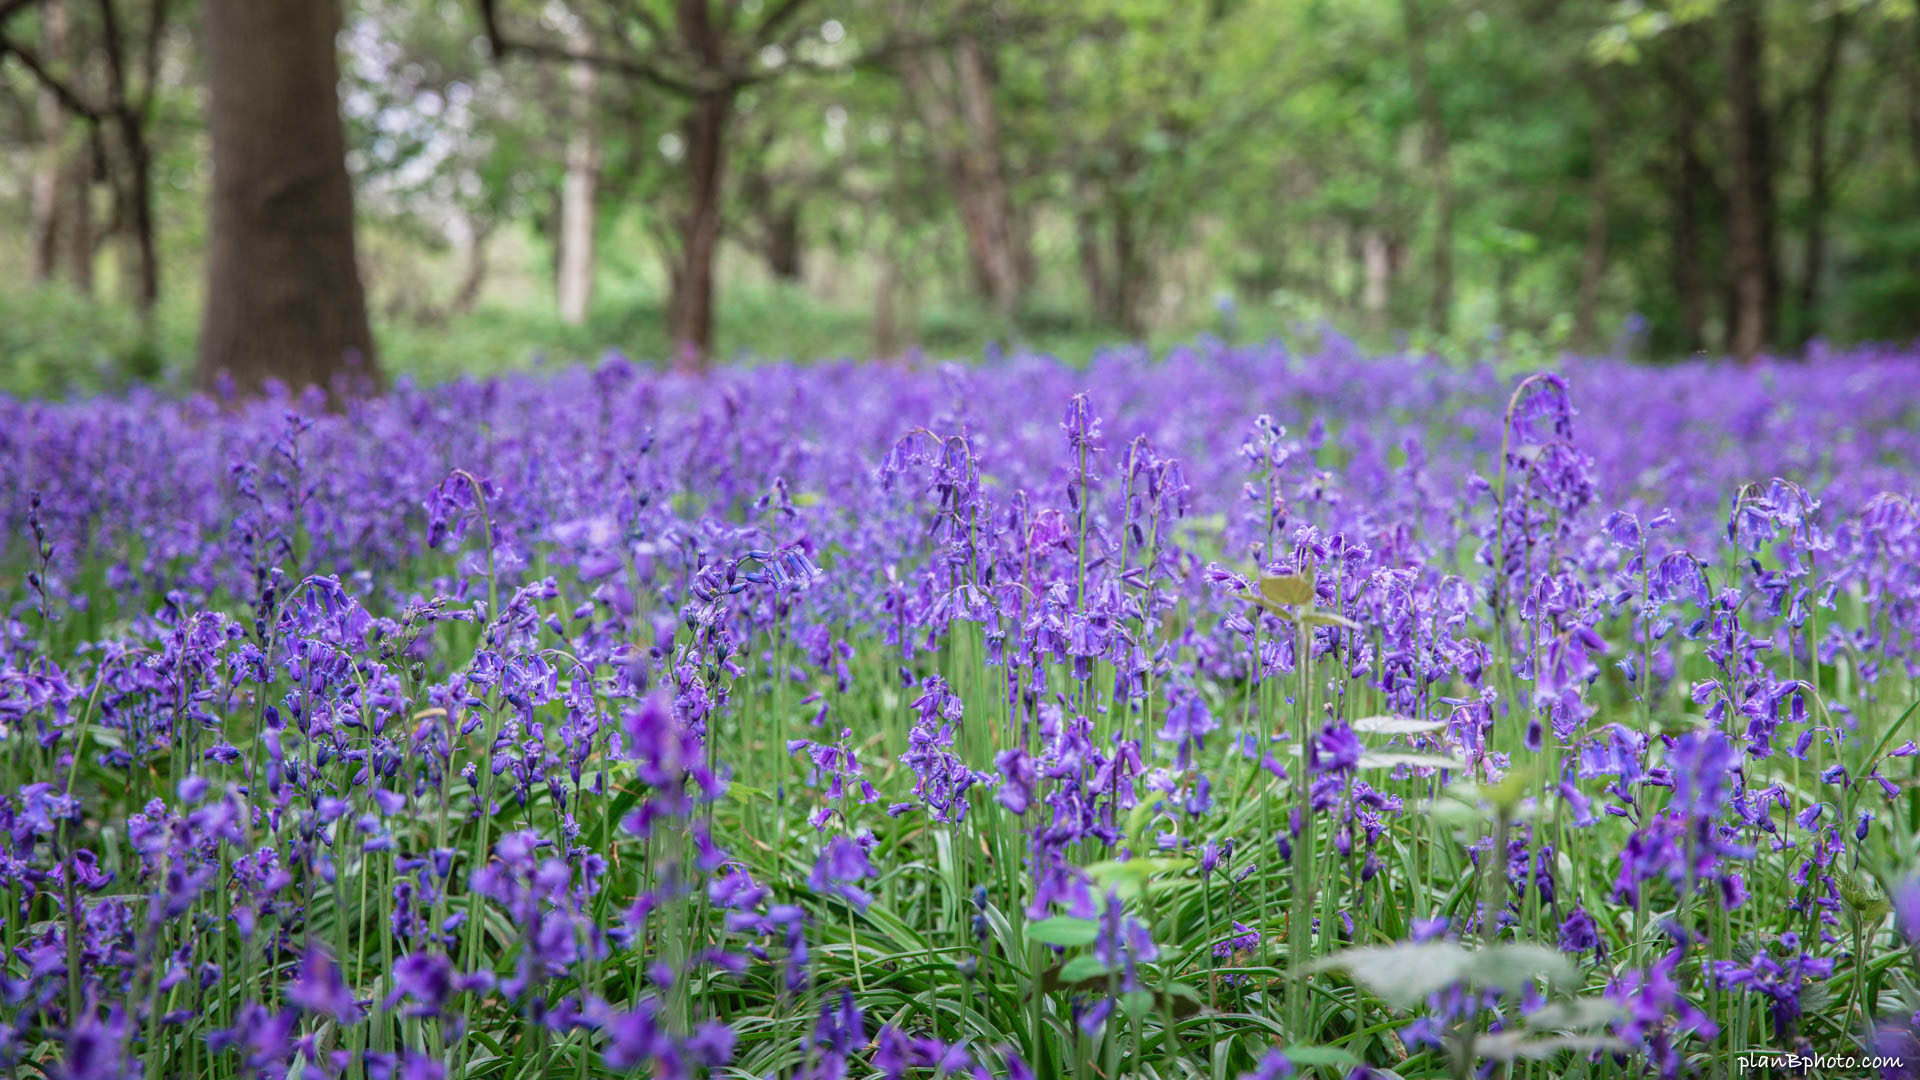 Native English bluebells in a woodland